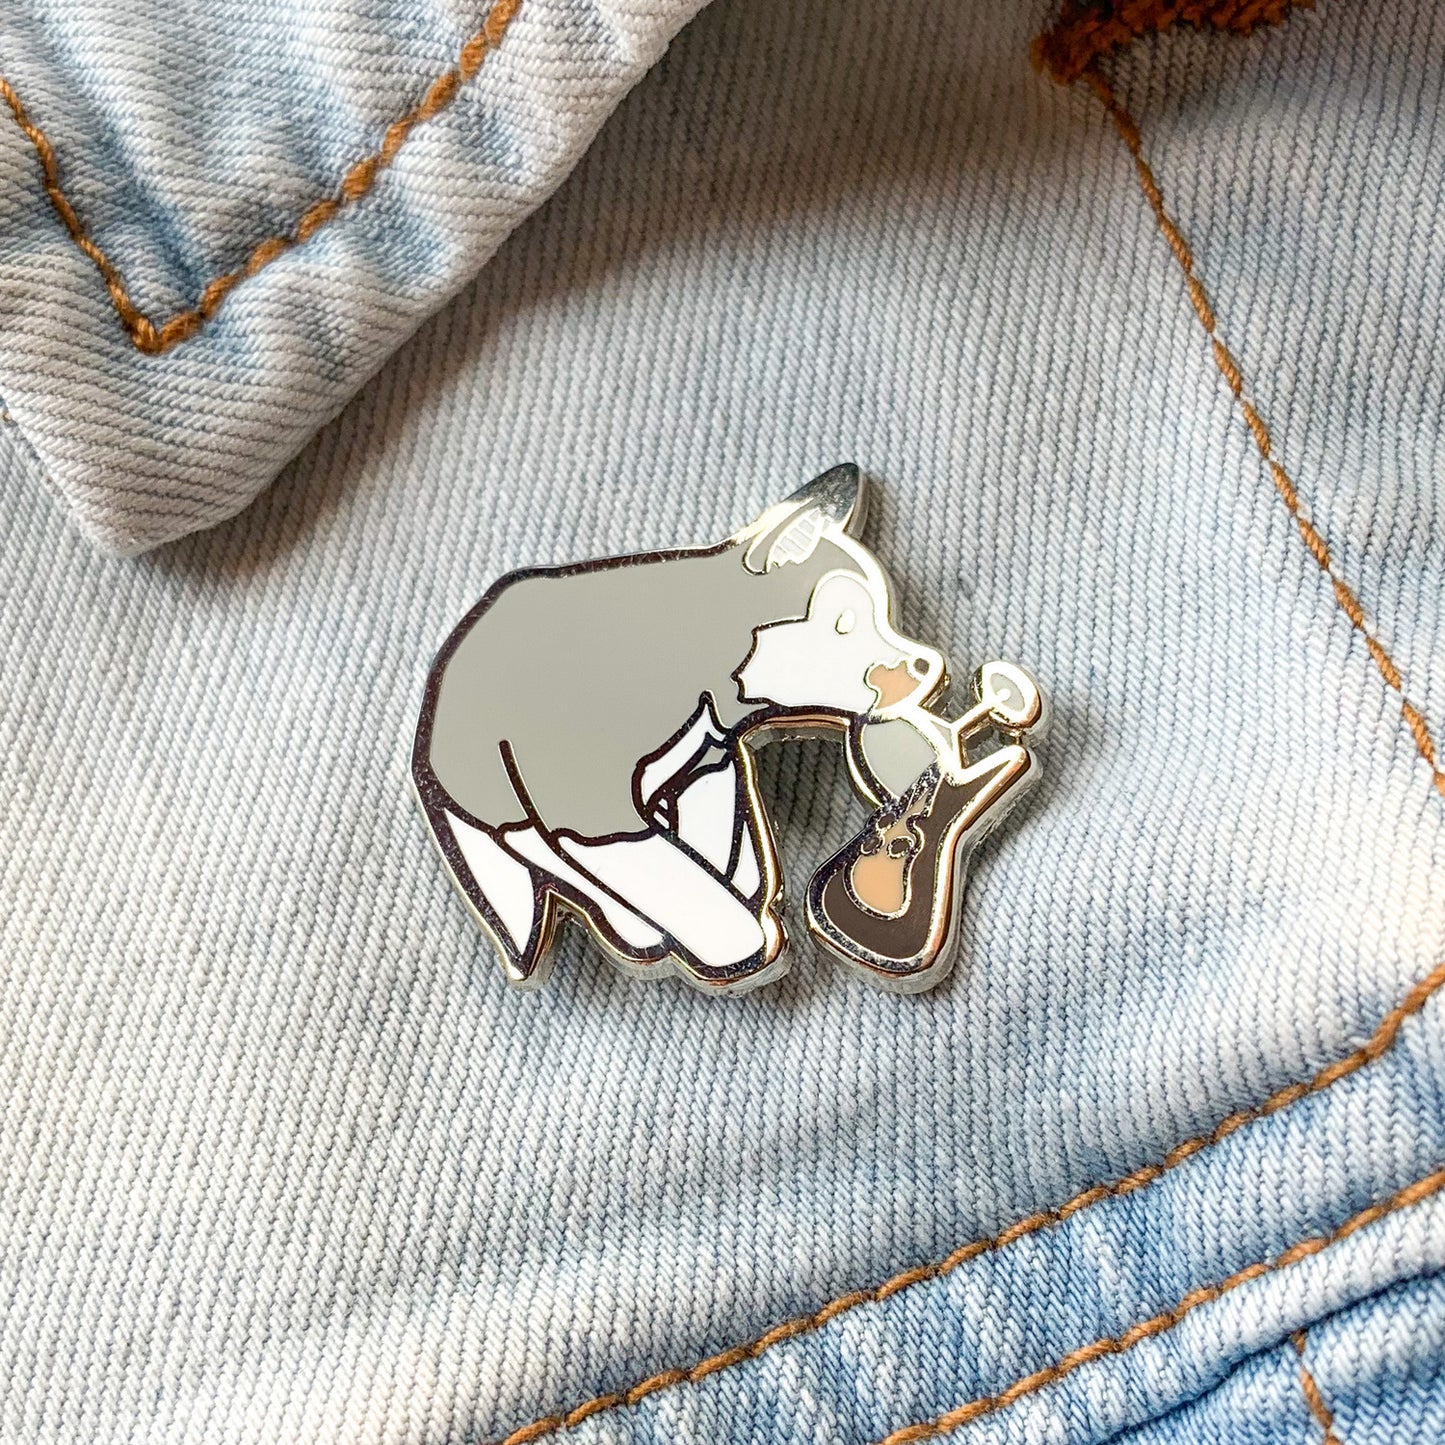 Husky and Espresso Martini Cocktail Hard Enamel Pin by Cocktail Critters on Denim